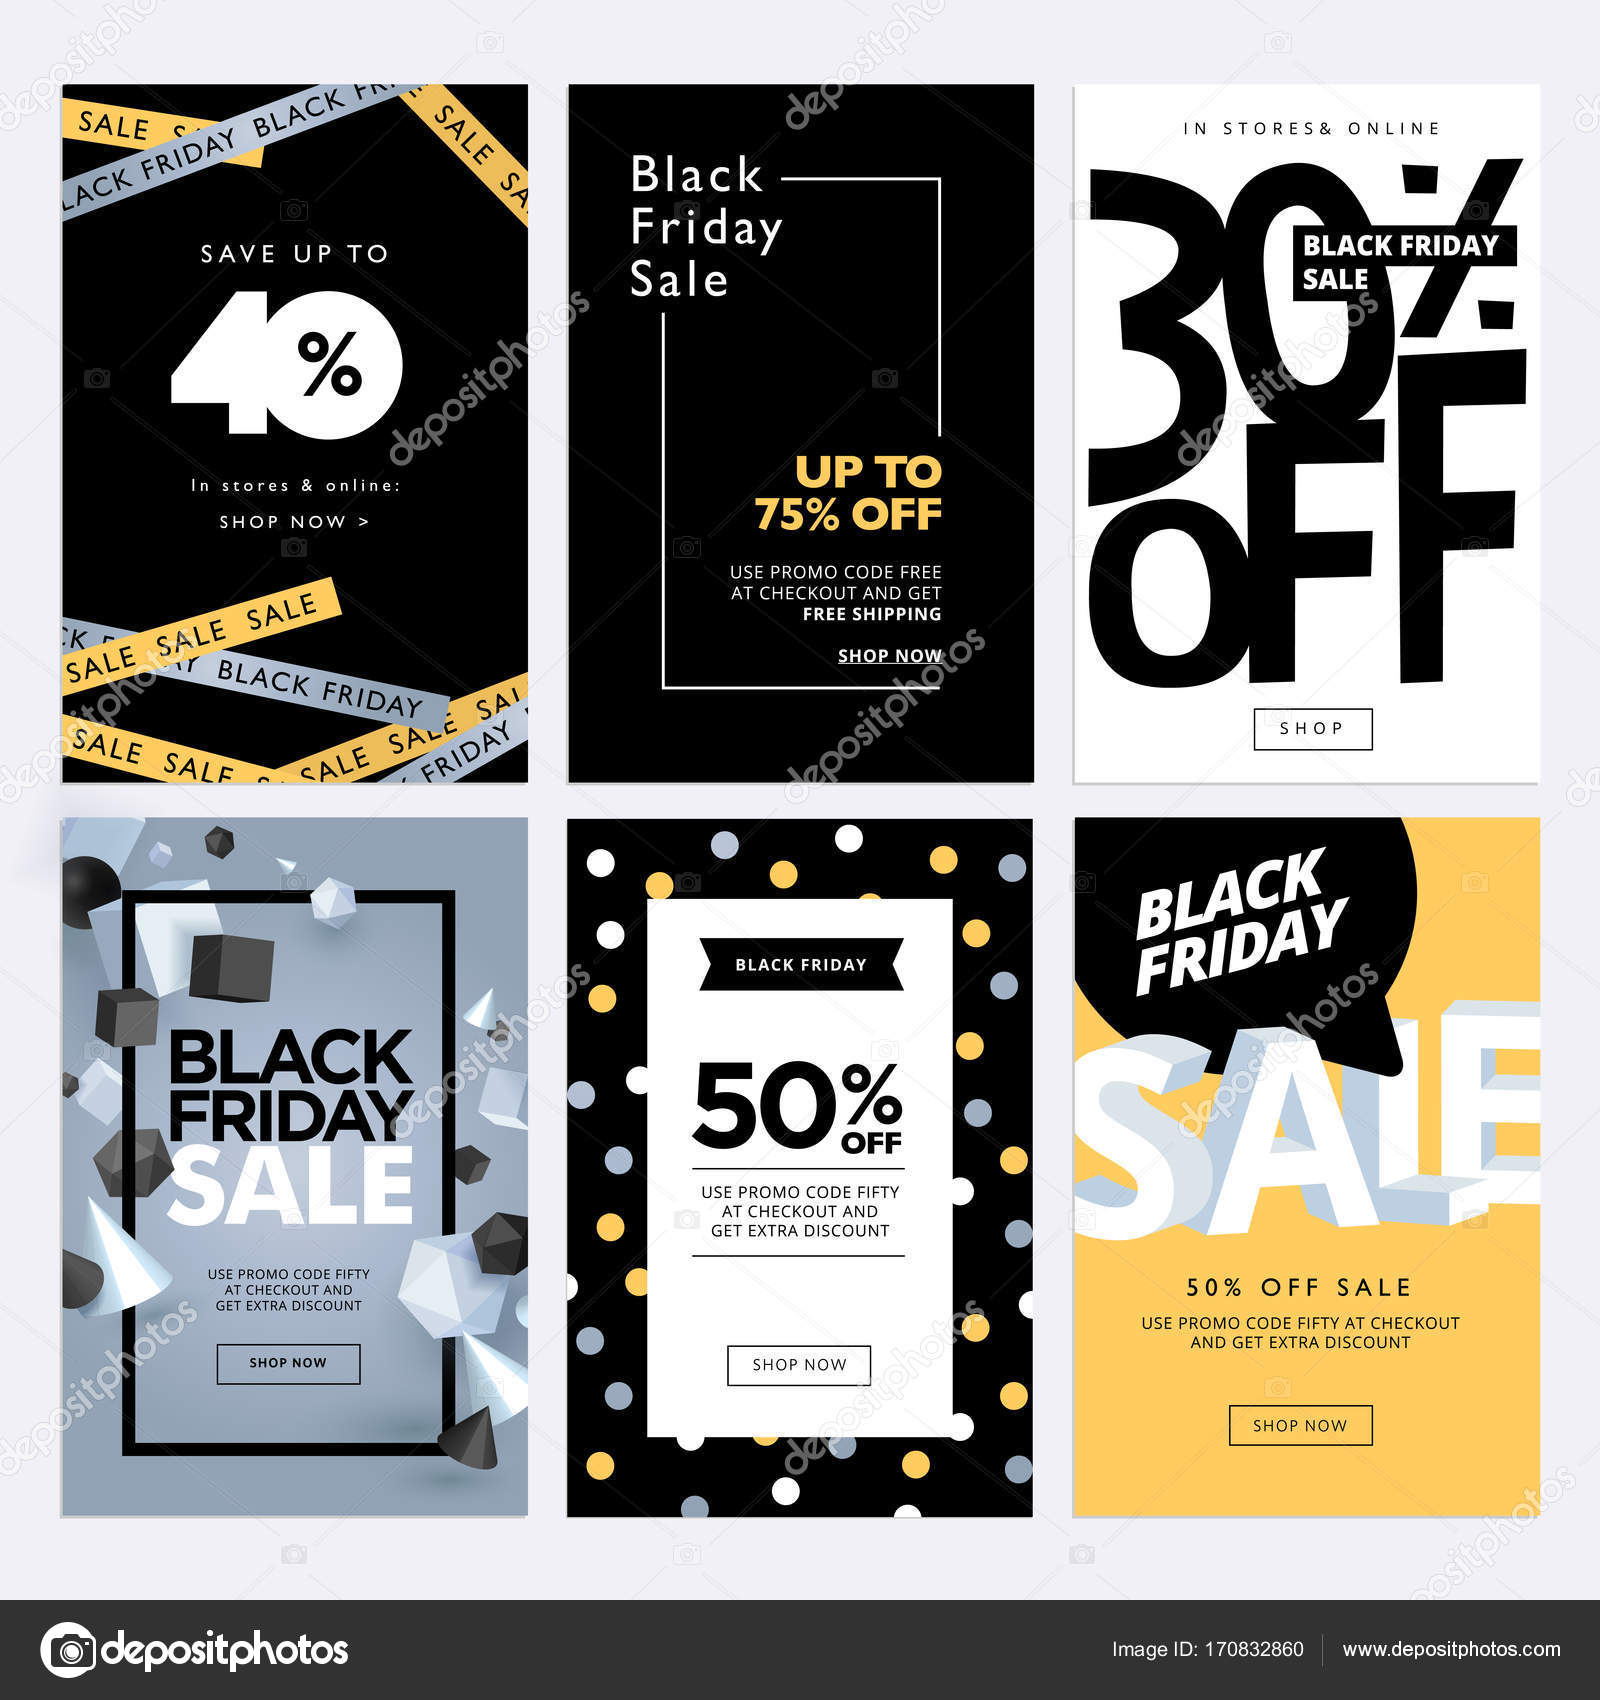 Clearance sale retail offer flyer social media graphic design template.